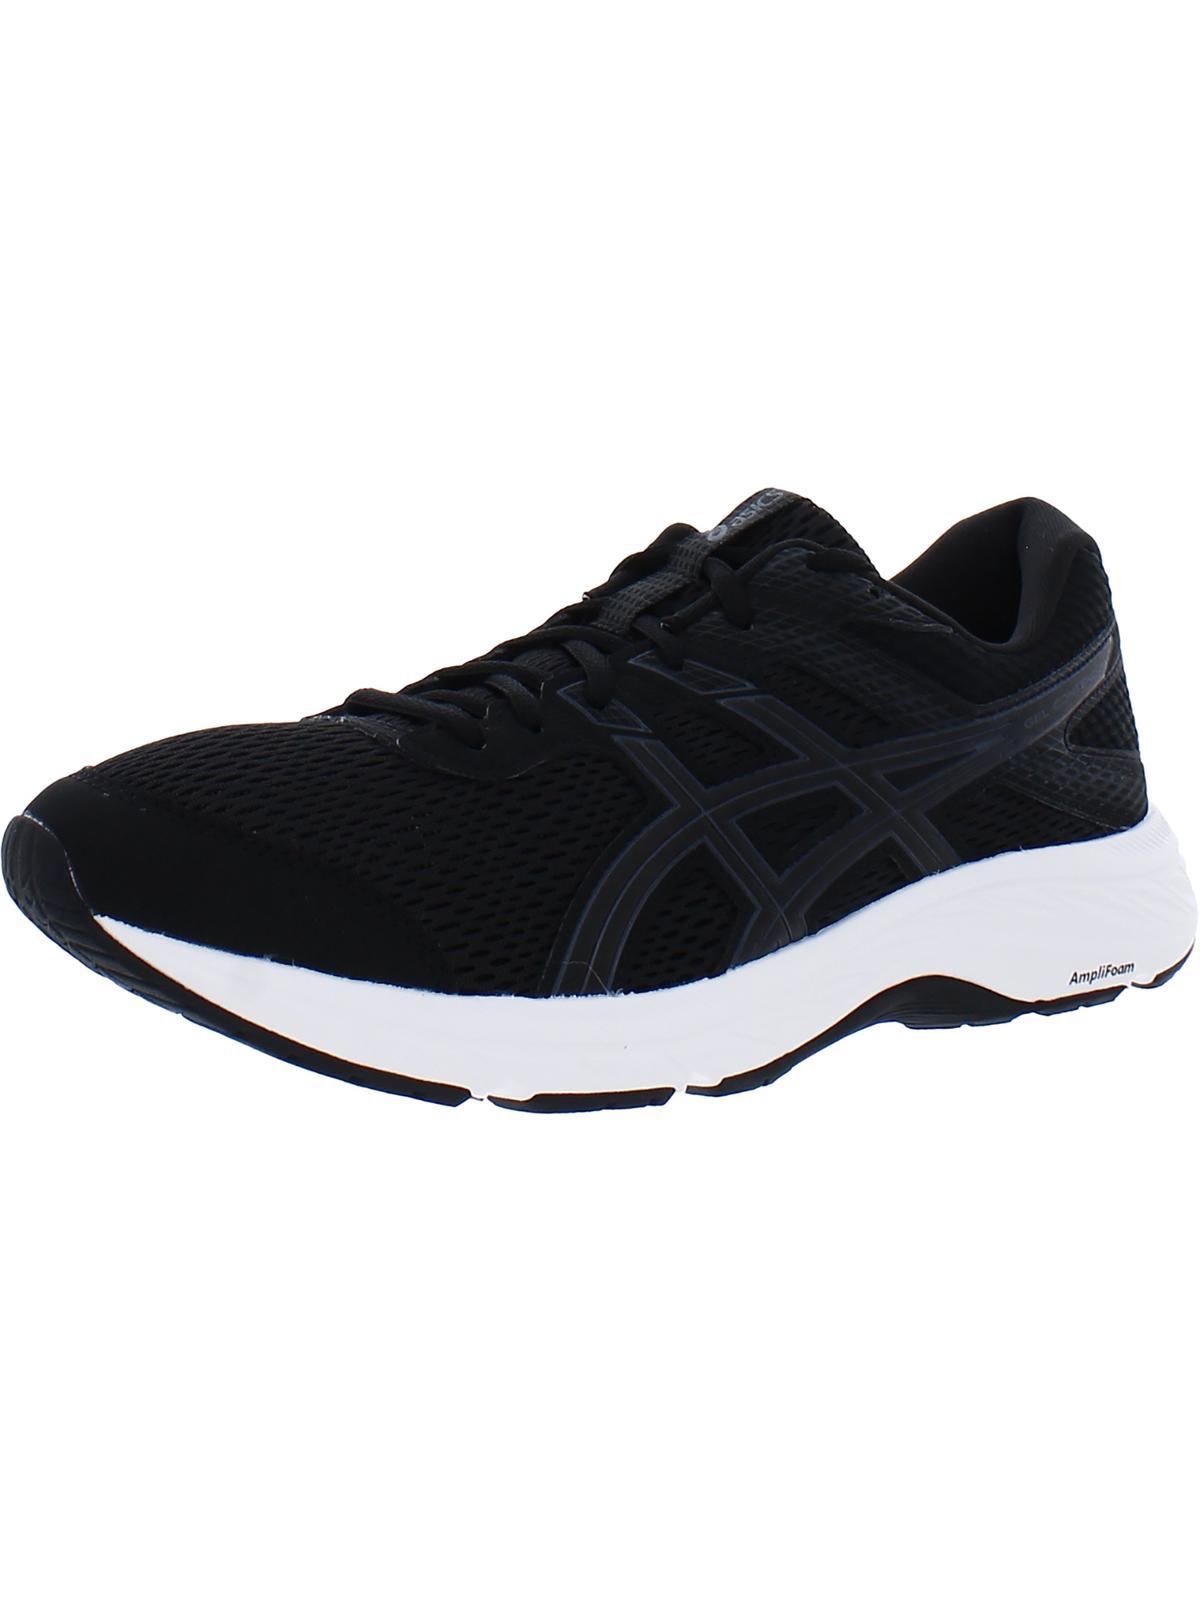 Asics Gel Contend 6 Sneakers Trainers Running Shoes in Black for Men | Lyst